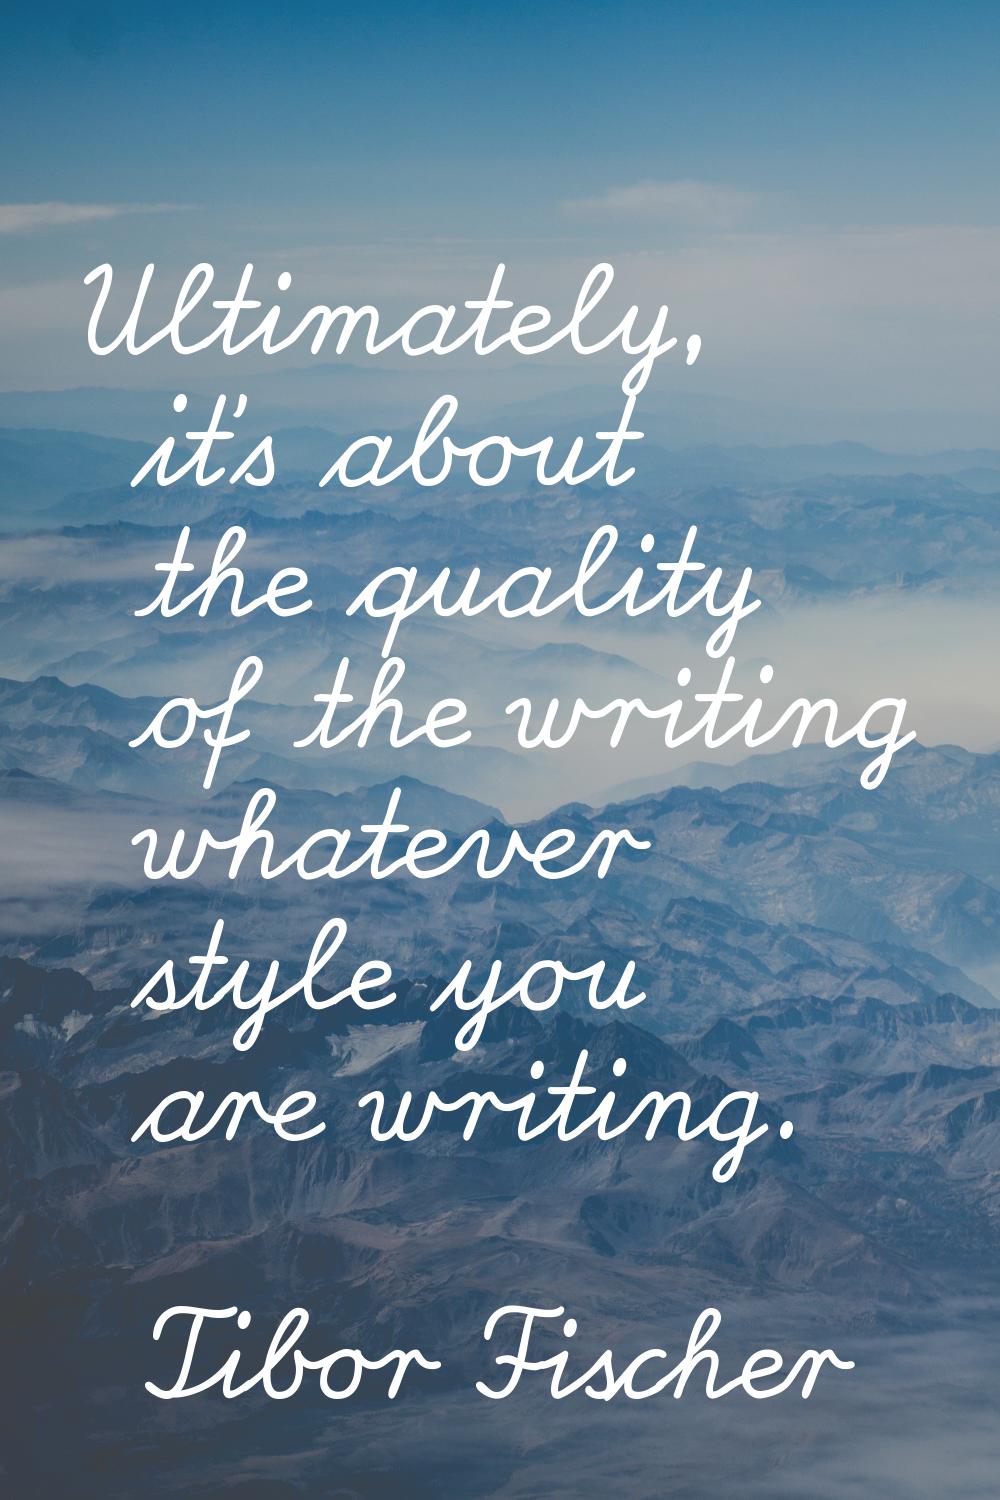 Ultimately, it's about the quality of the writing whatever style you are writing.